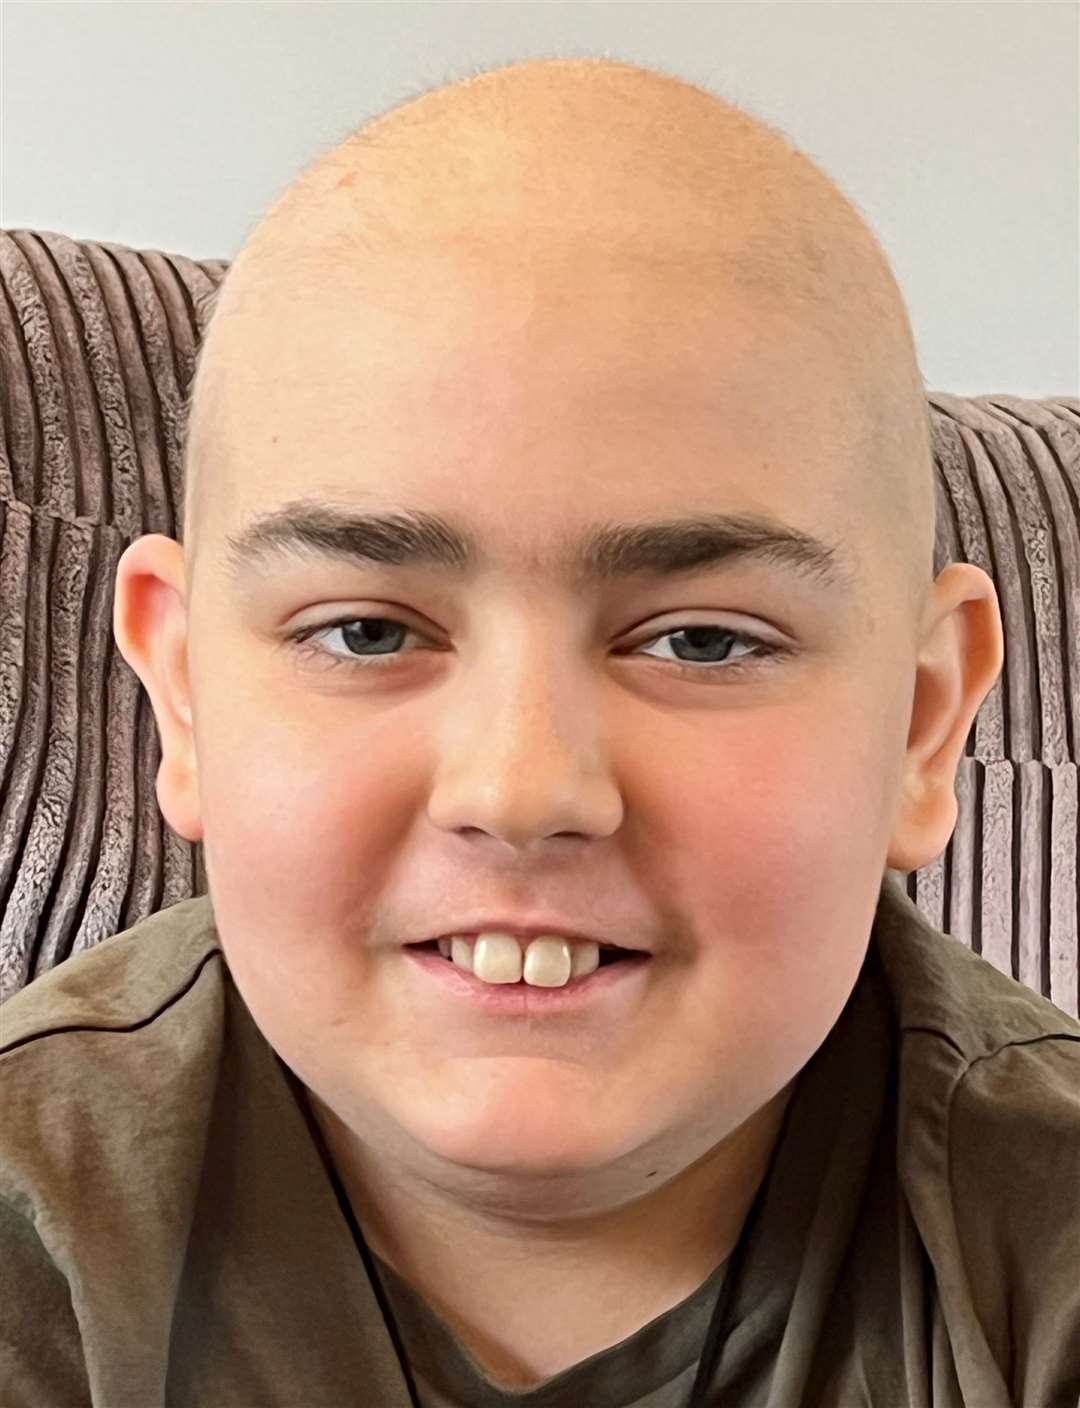 Louie had to shave his hair off before he could receive his transplant